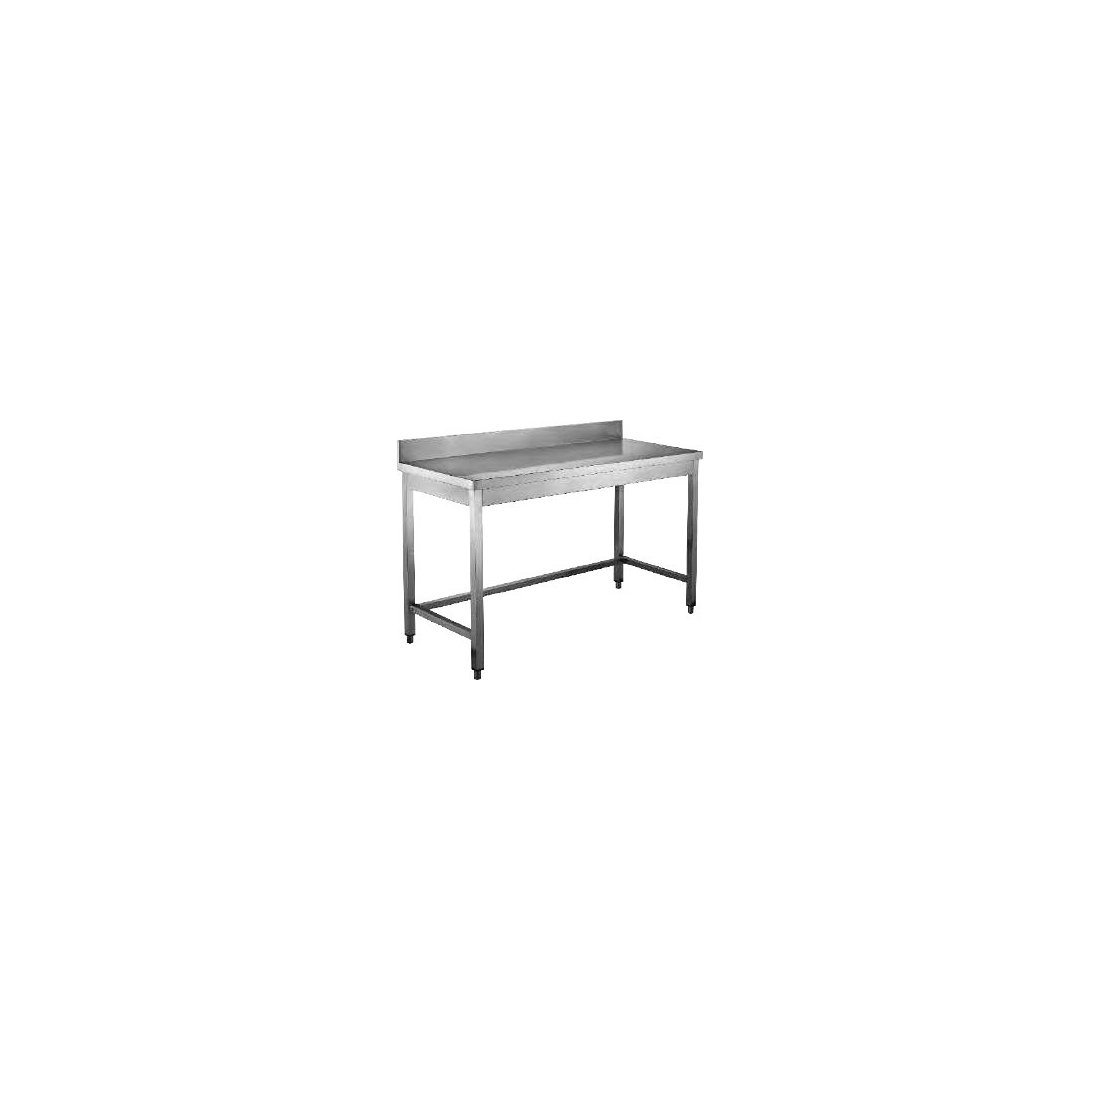 Stainless Steel Service Table with backsplash 1.5m (WTD-151B)